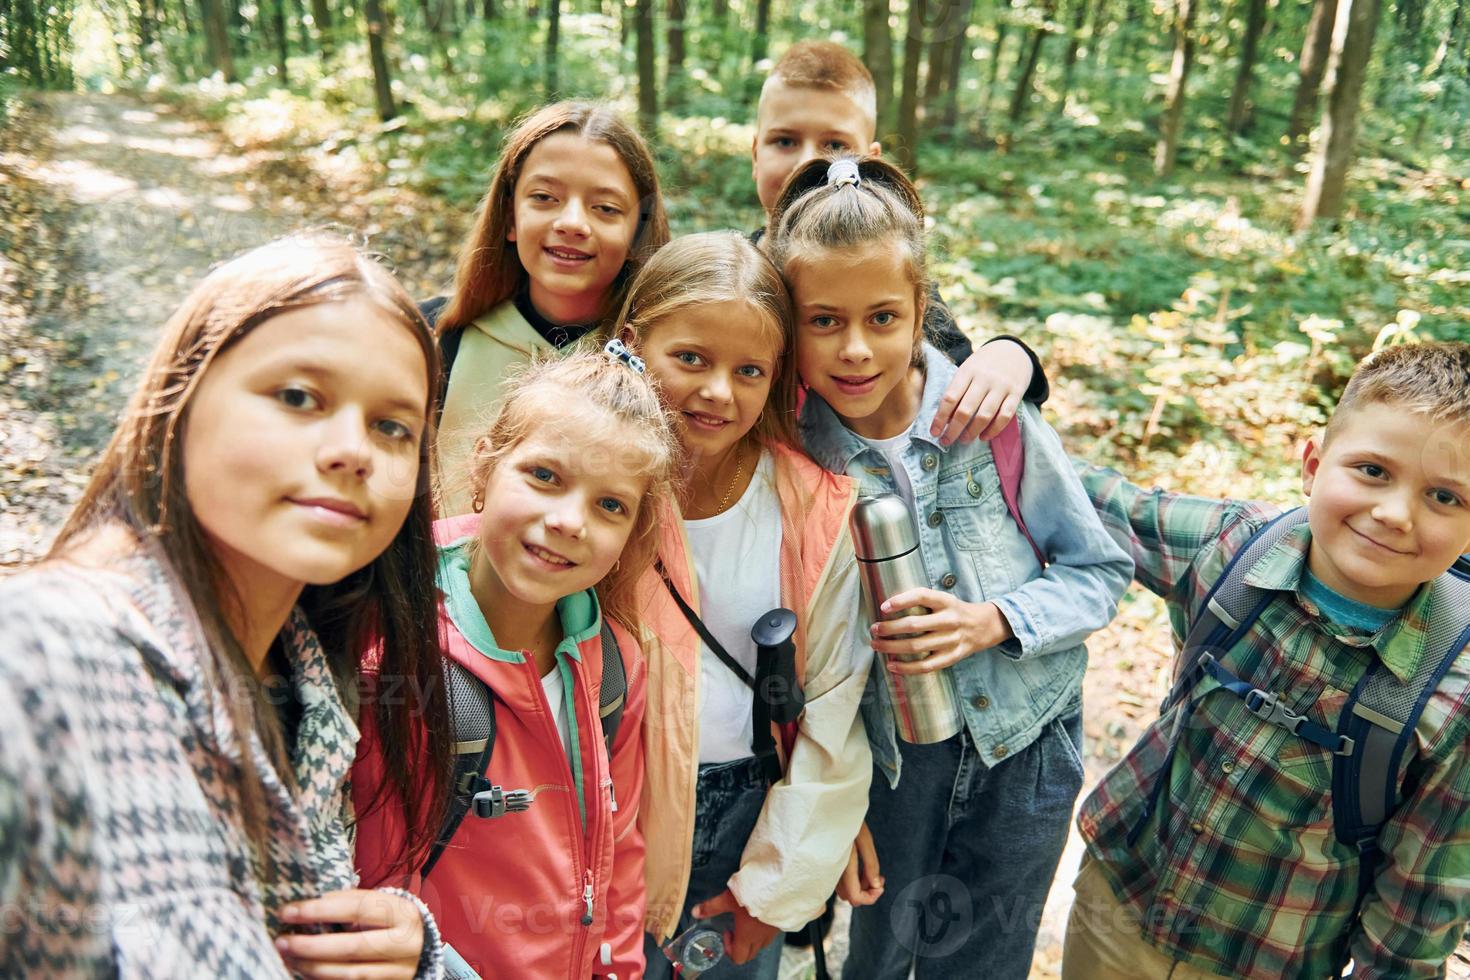 Making selfie. Kids in green forest at summer daytime together photo